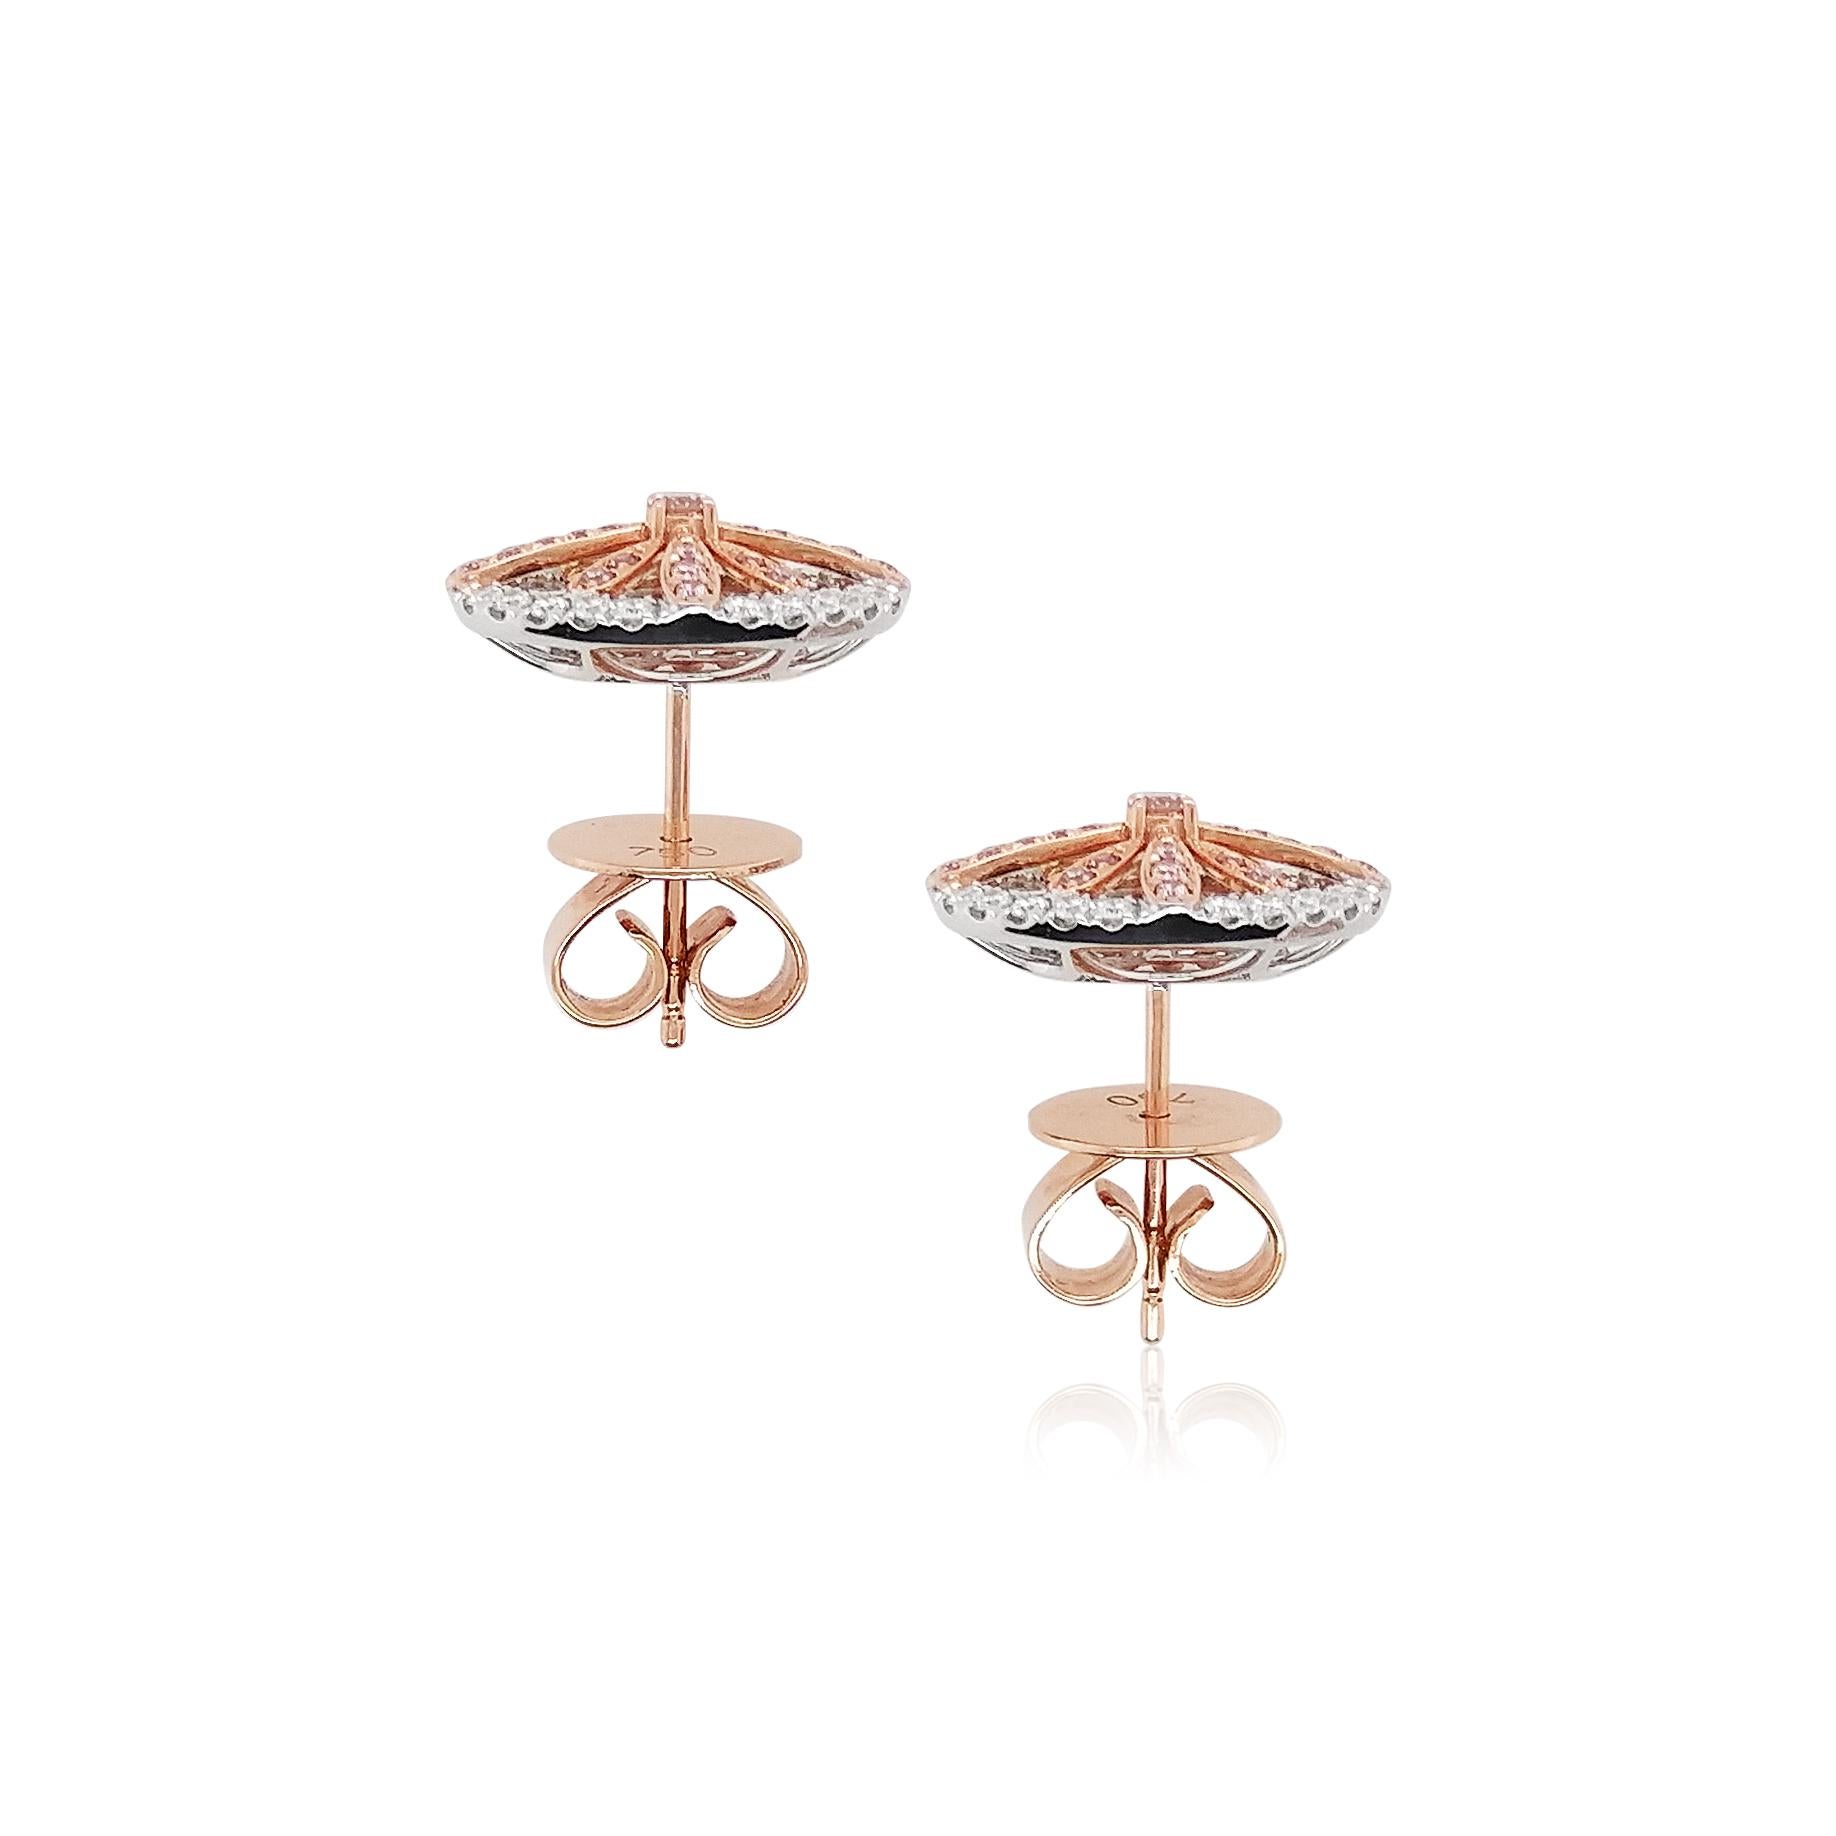 These platinum earrings offer a subtle sparkle at the forefront of their design. Featuring natural Argyle pink diamonds surrounded by a halo of scintillating white diamonds, these pretty earrings will add a touch of elegance to any outfit. Combine